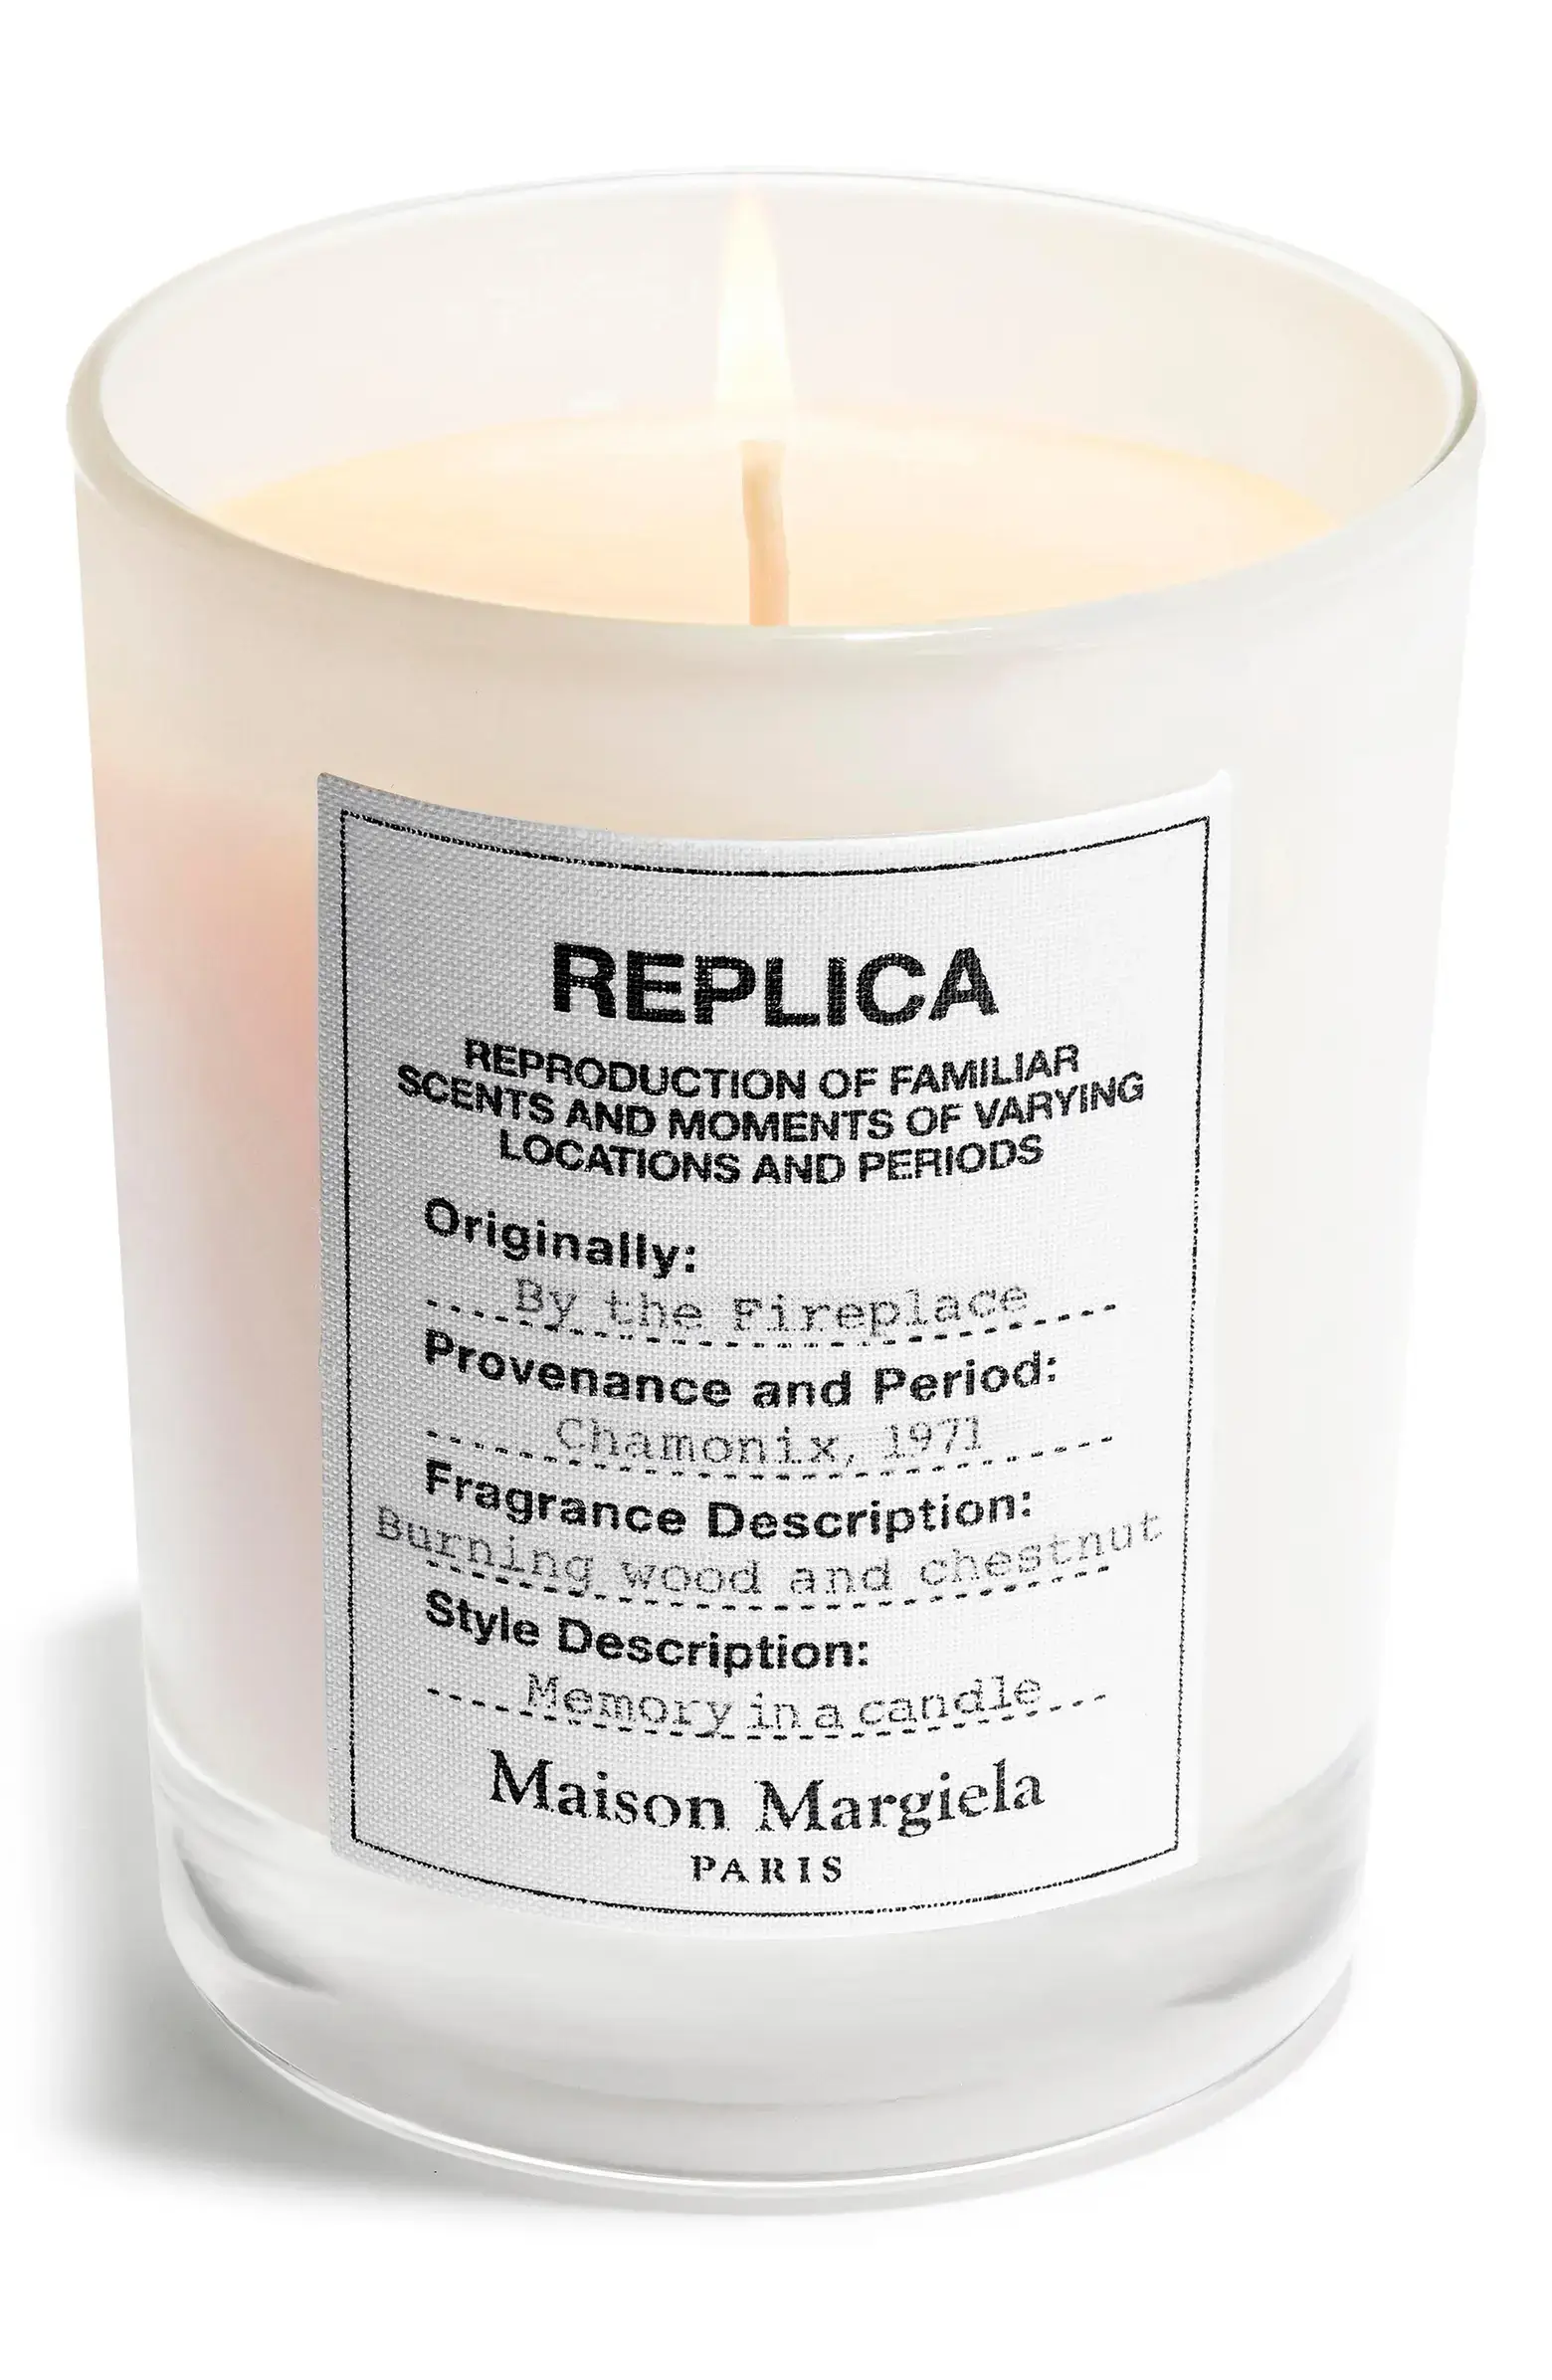 Maison Margiella "Replica" By the Fireplace Scented Candle